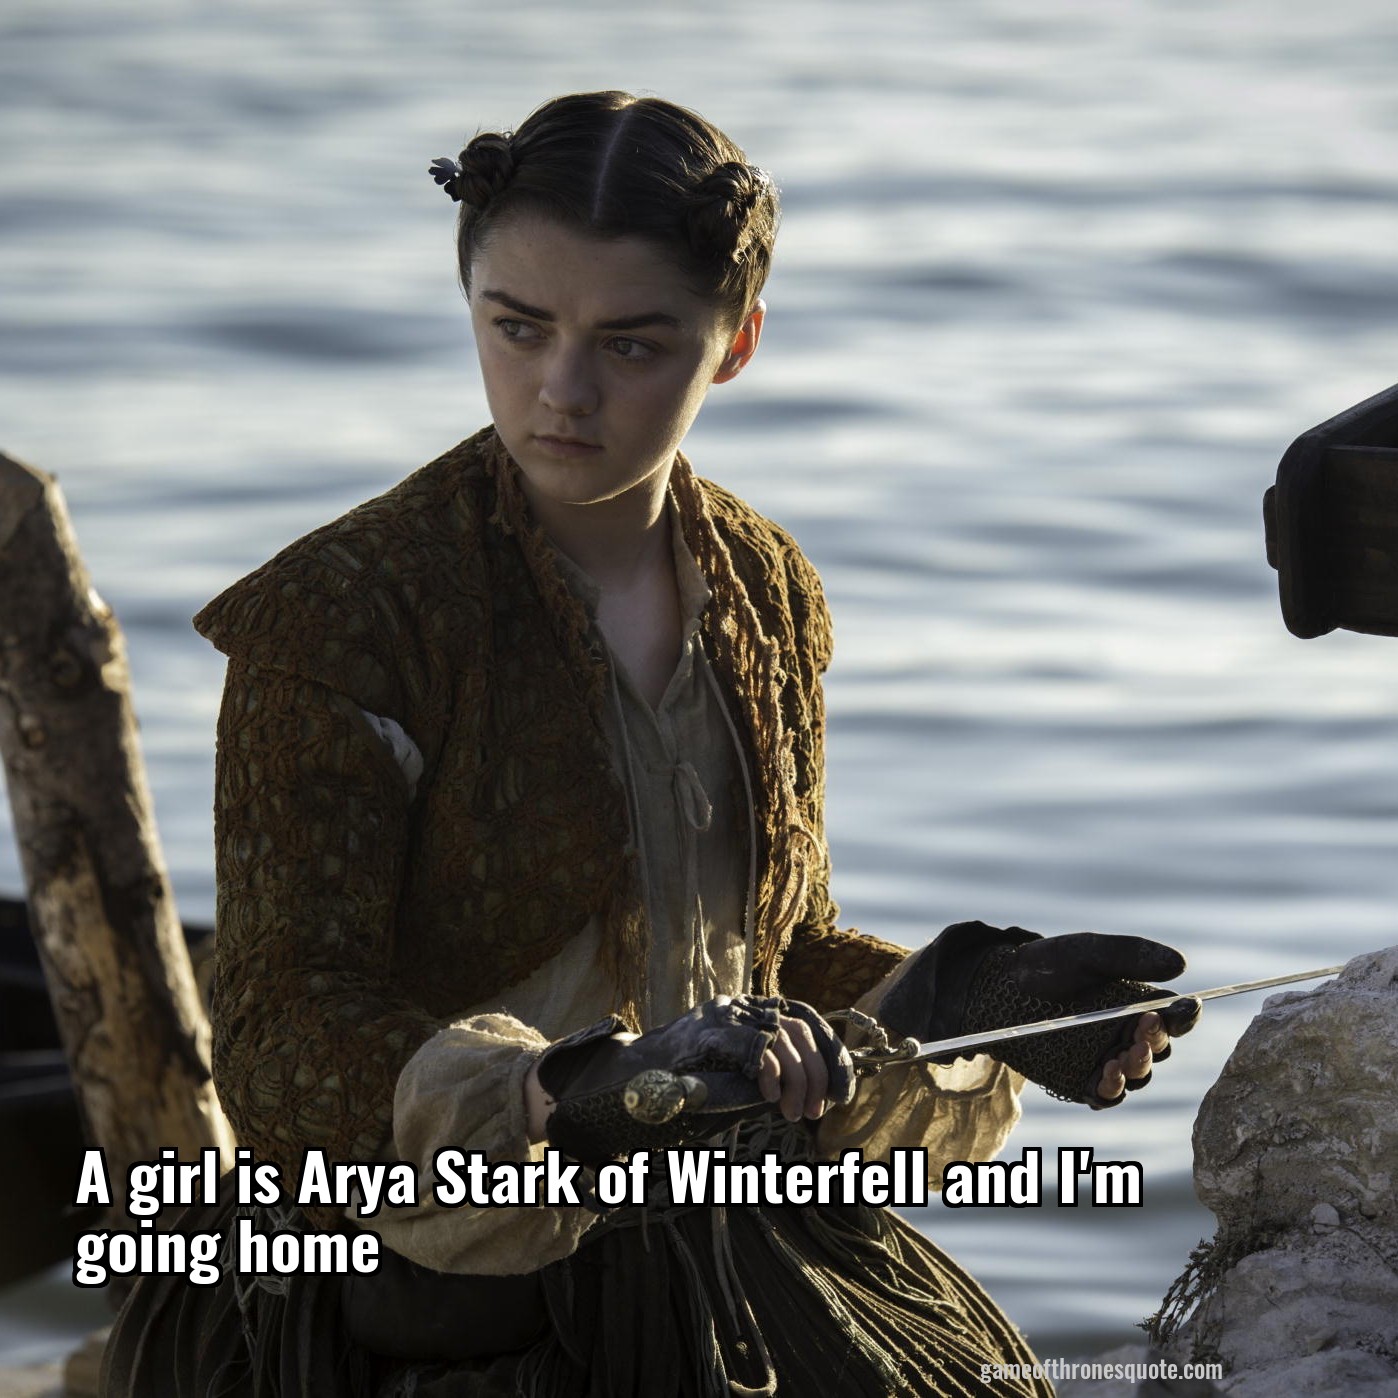 A girl is Arya Stark of Winterfell and I'm going home